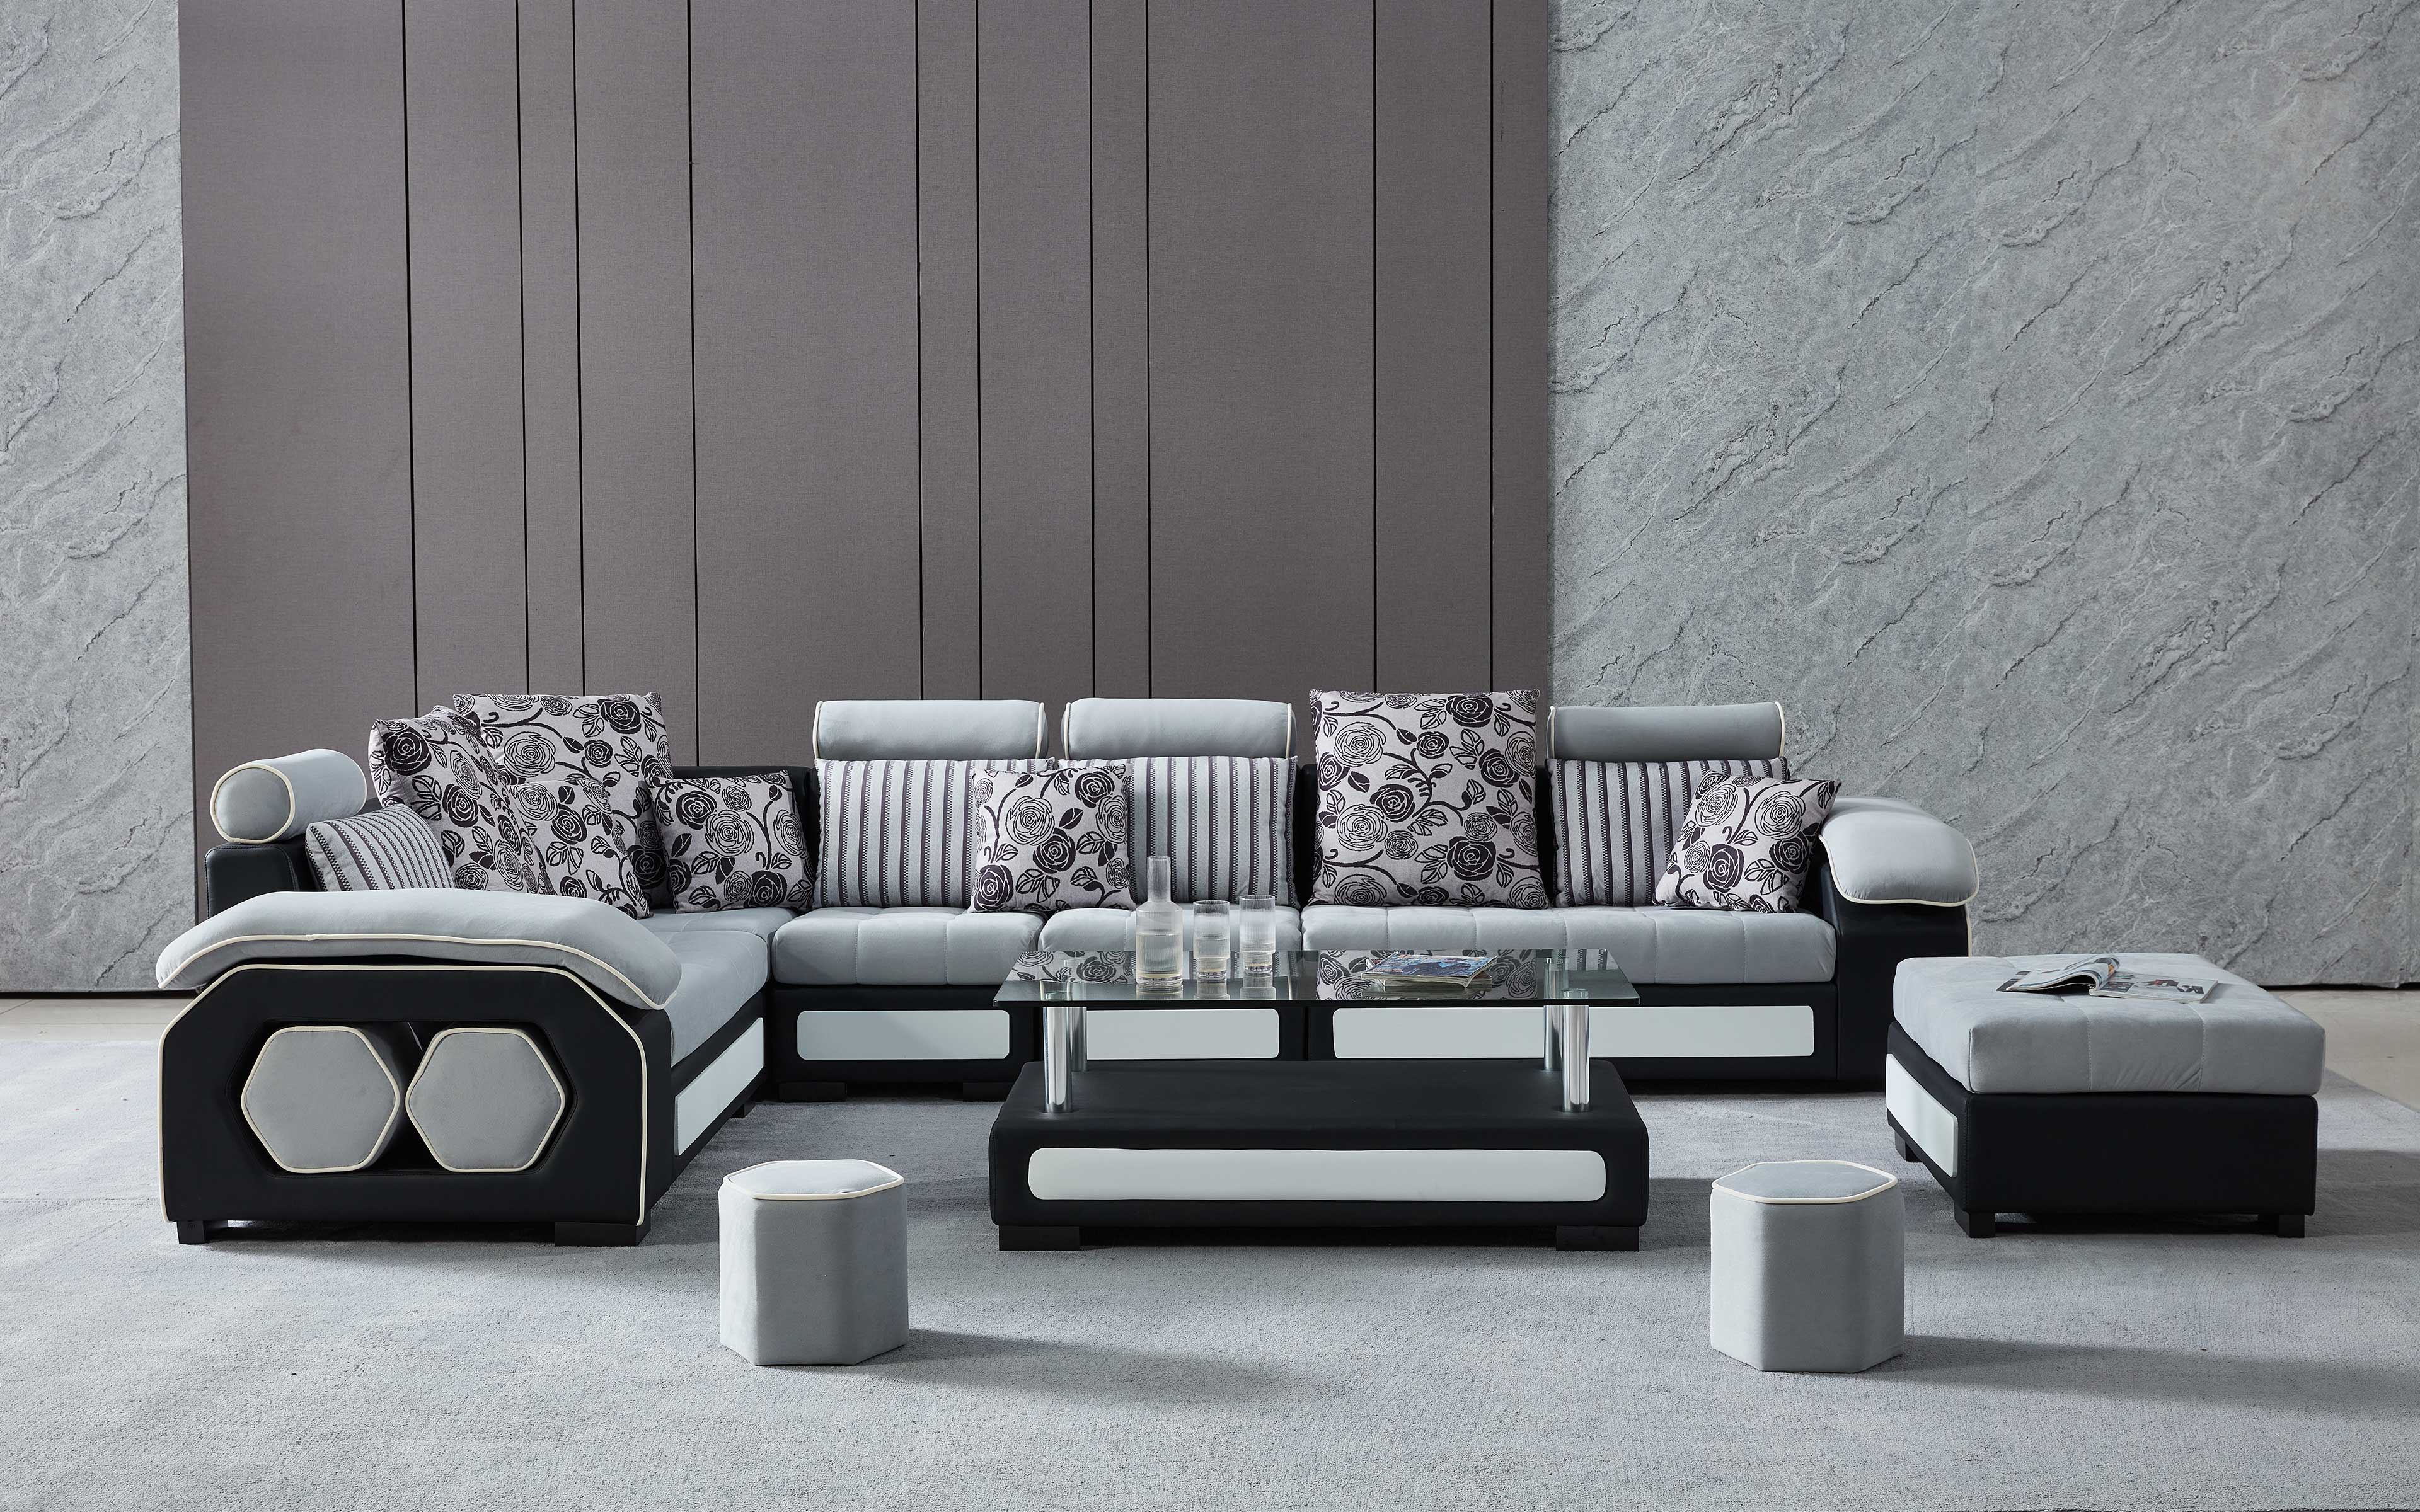 [Daily Deal] Orion Classical Modular Tufted Sectional